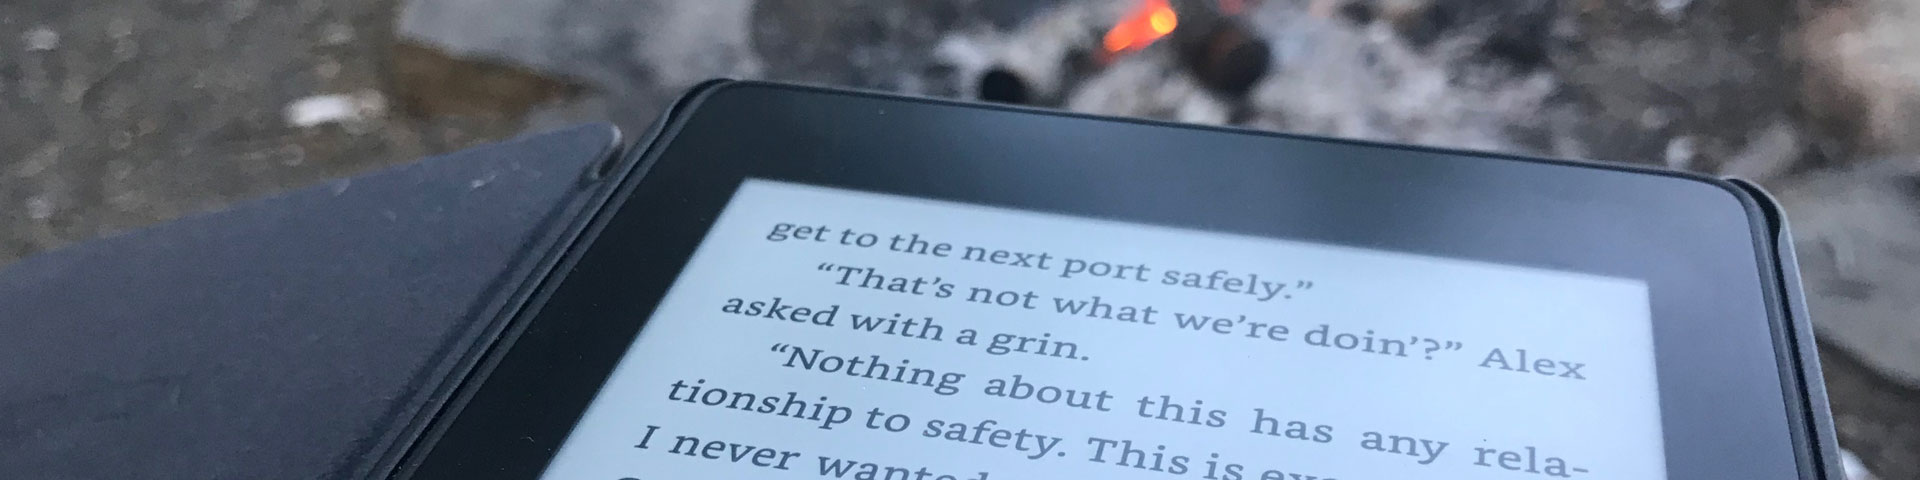 A Kindle e-reader open to text in the foreground, with a campfire in the background.